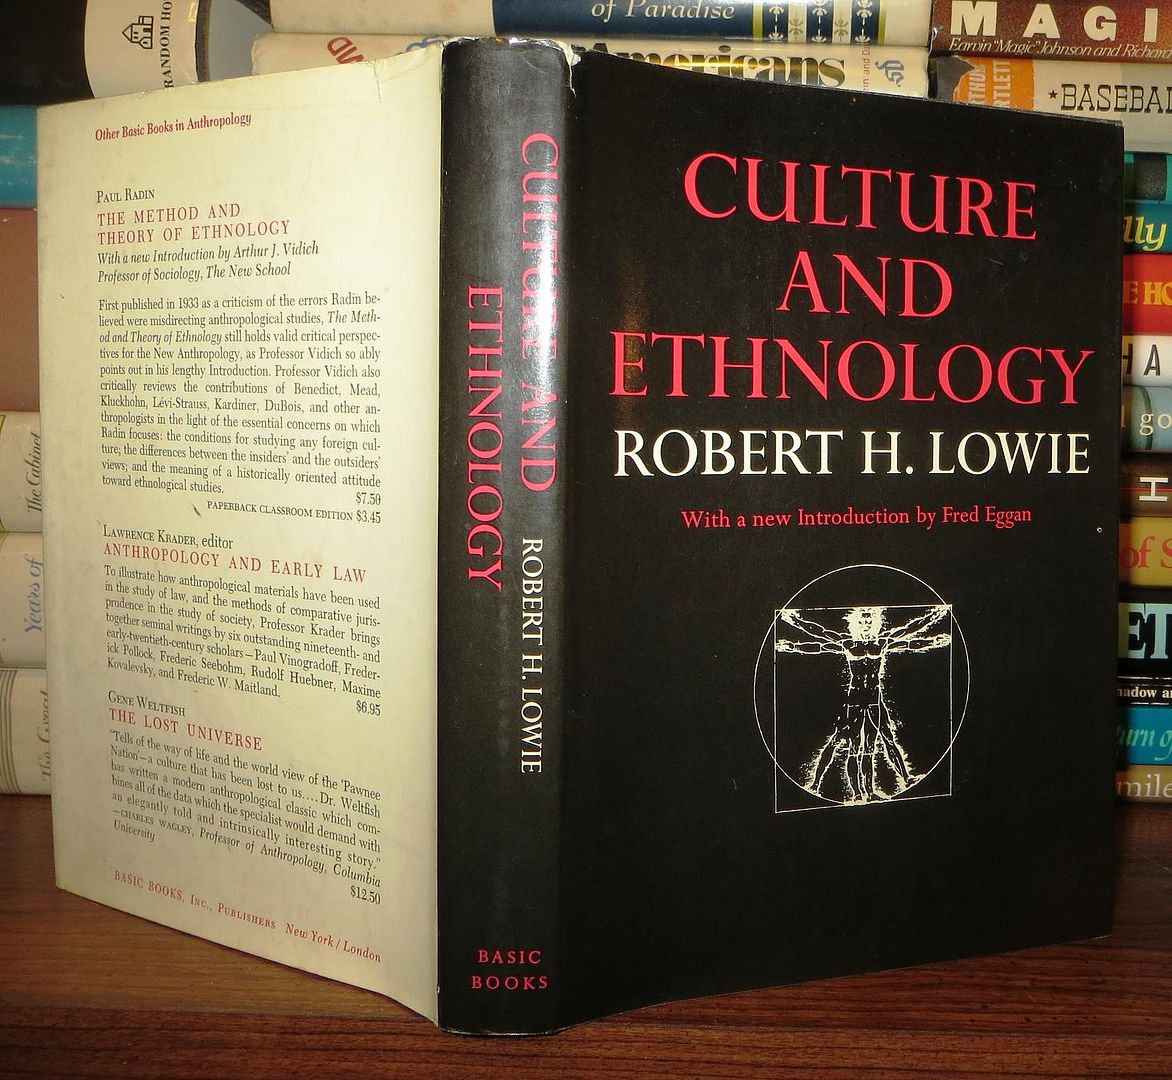 LOWIE, ROBERT H. - Culture and Ethnology